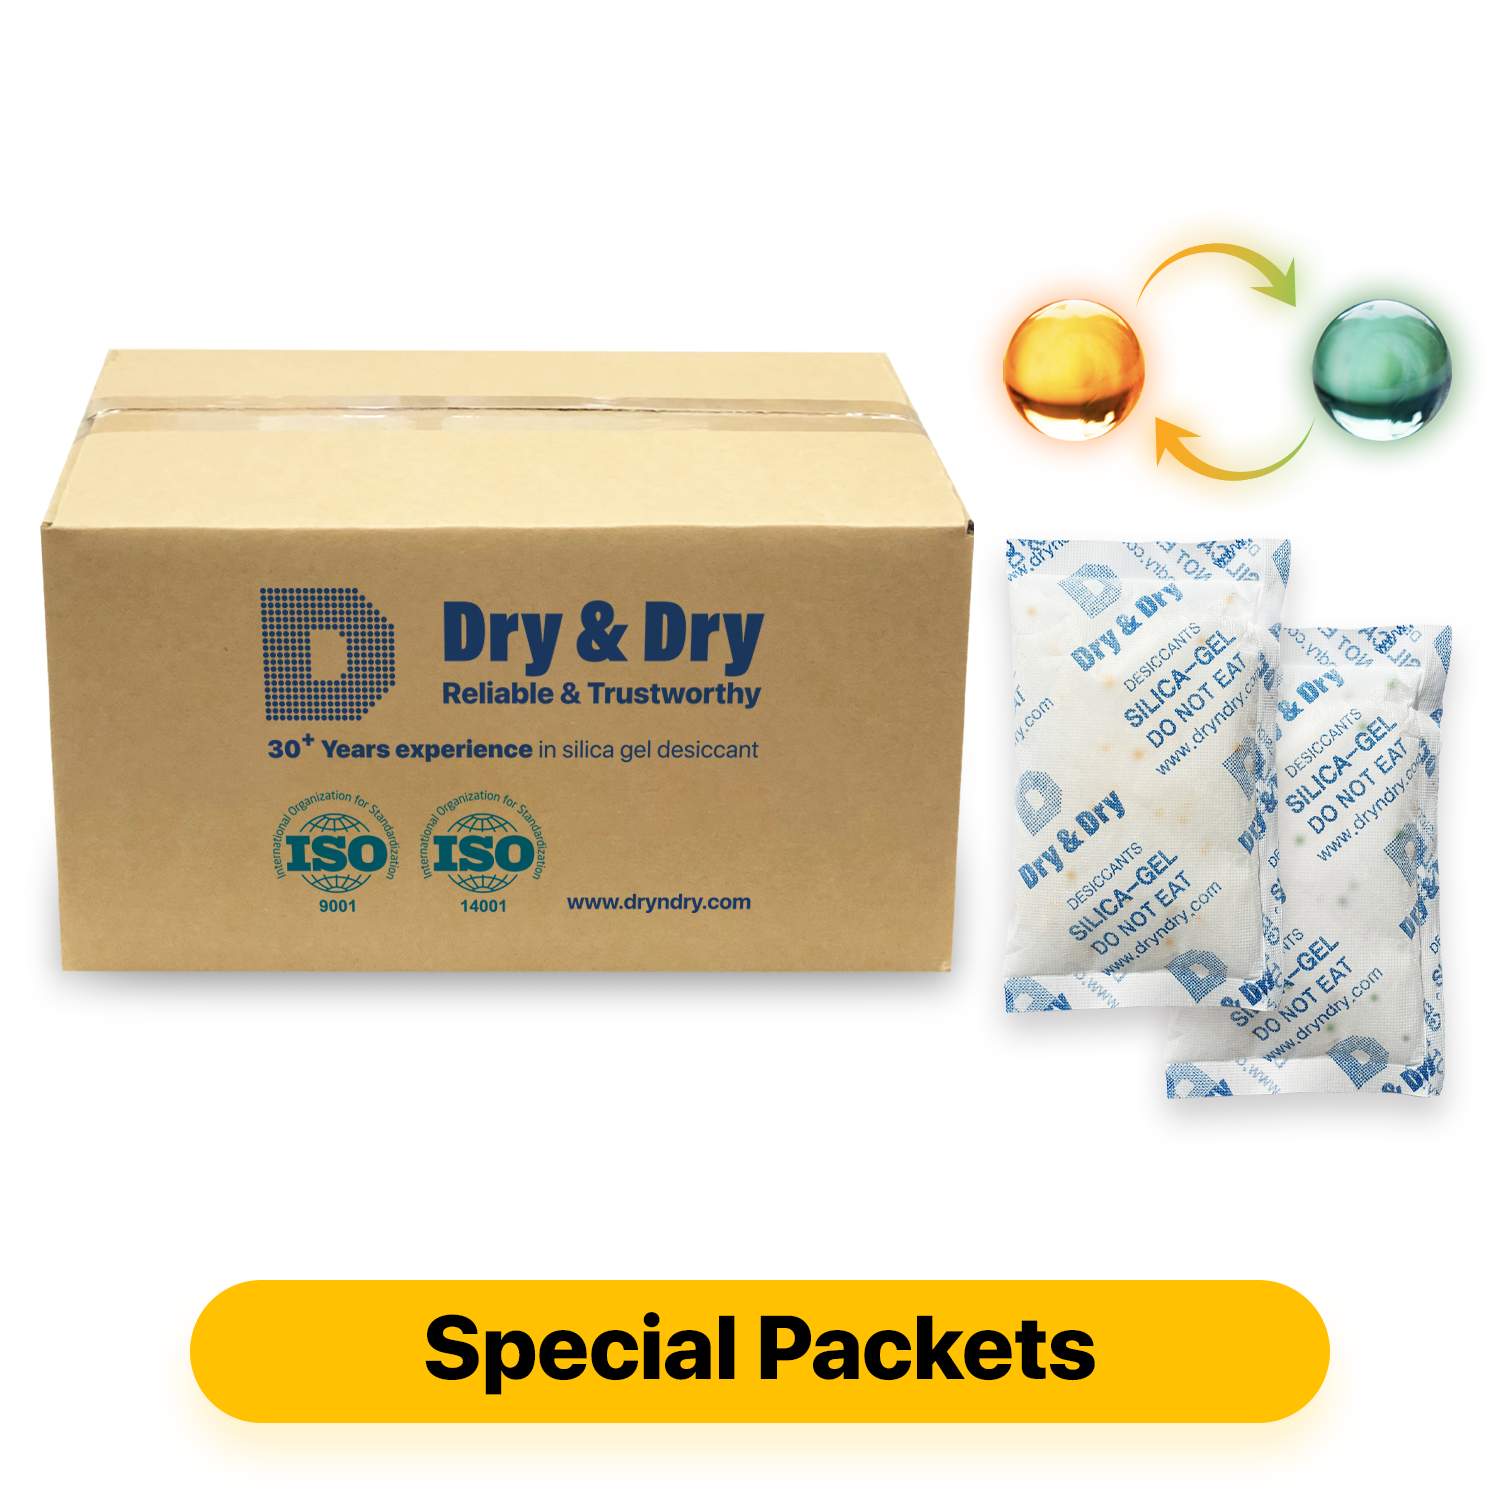 100 Gram [200 Packs] "Dry & Dry" SPECIAL Food Safe Orange Indicating(Orange to Dark Green) Mixed Silica Gel Packets - Rechargeable(FDA Compliant)